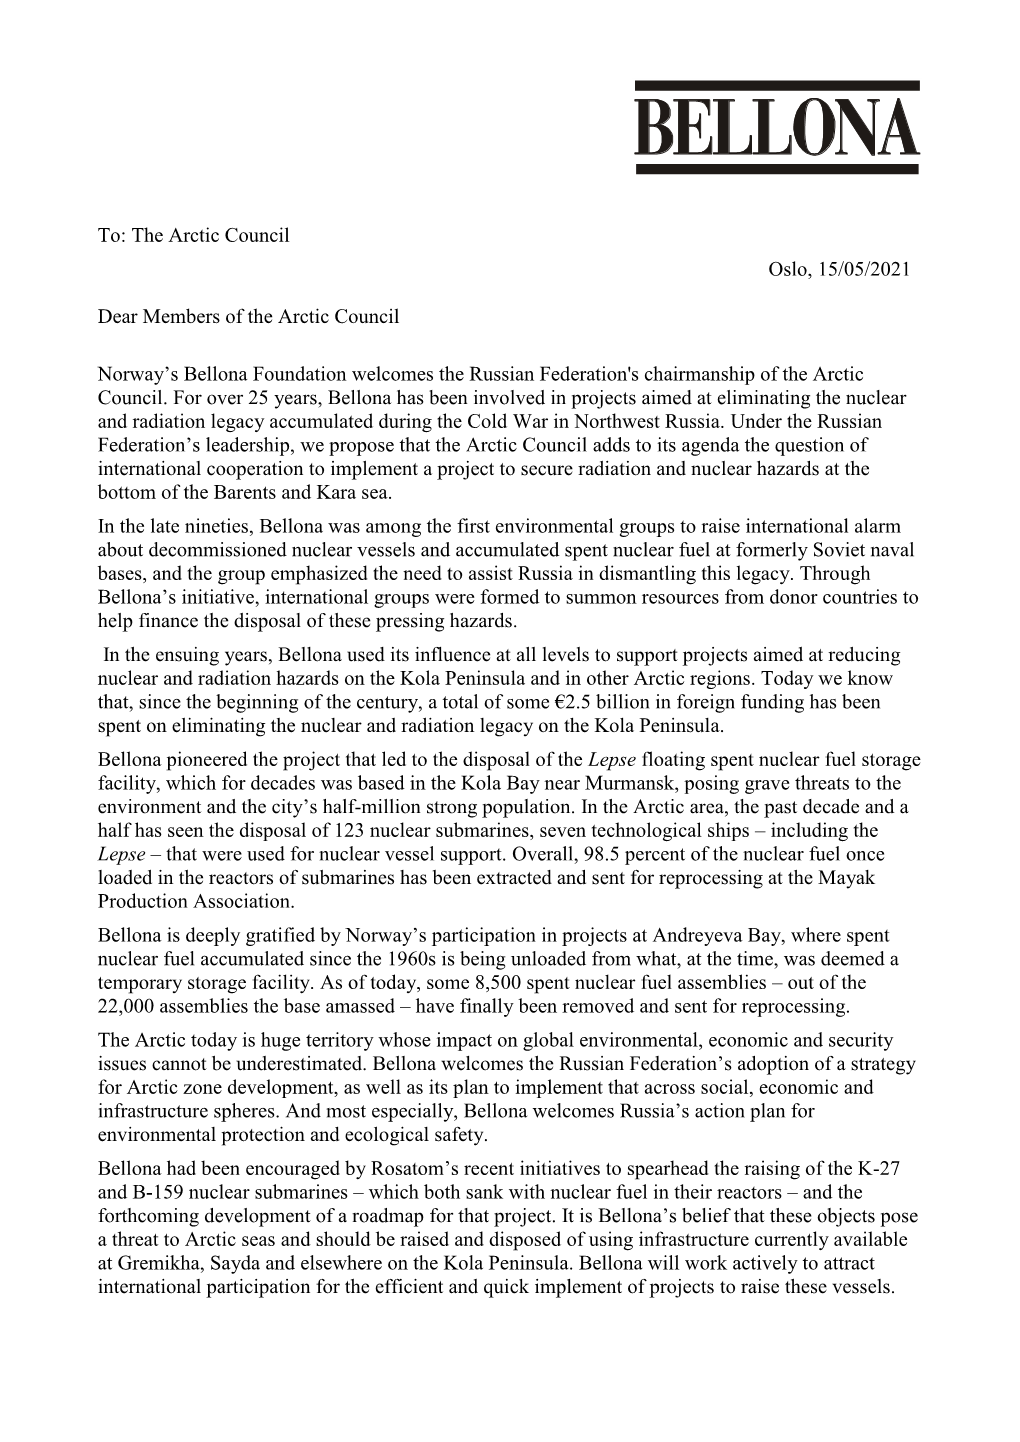 Letter to the Arctic Council